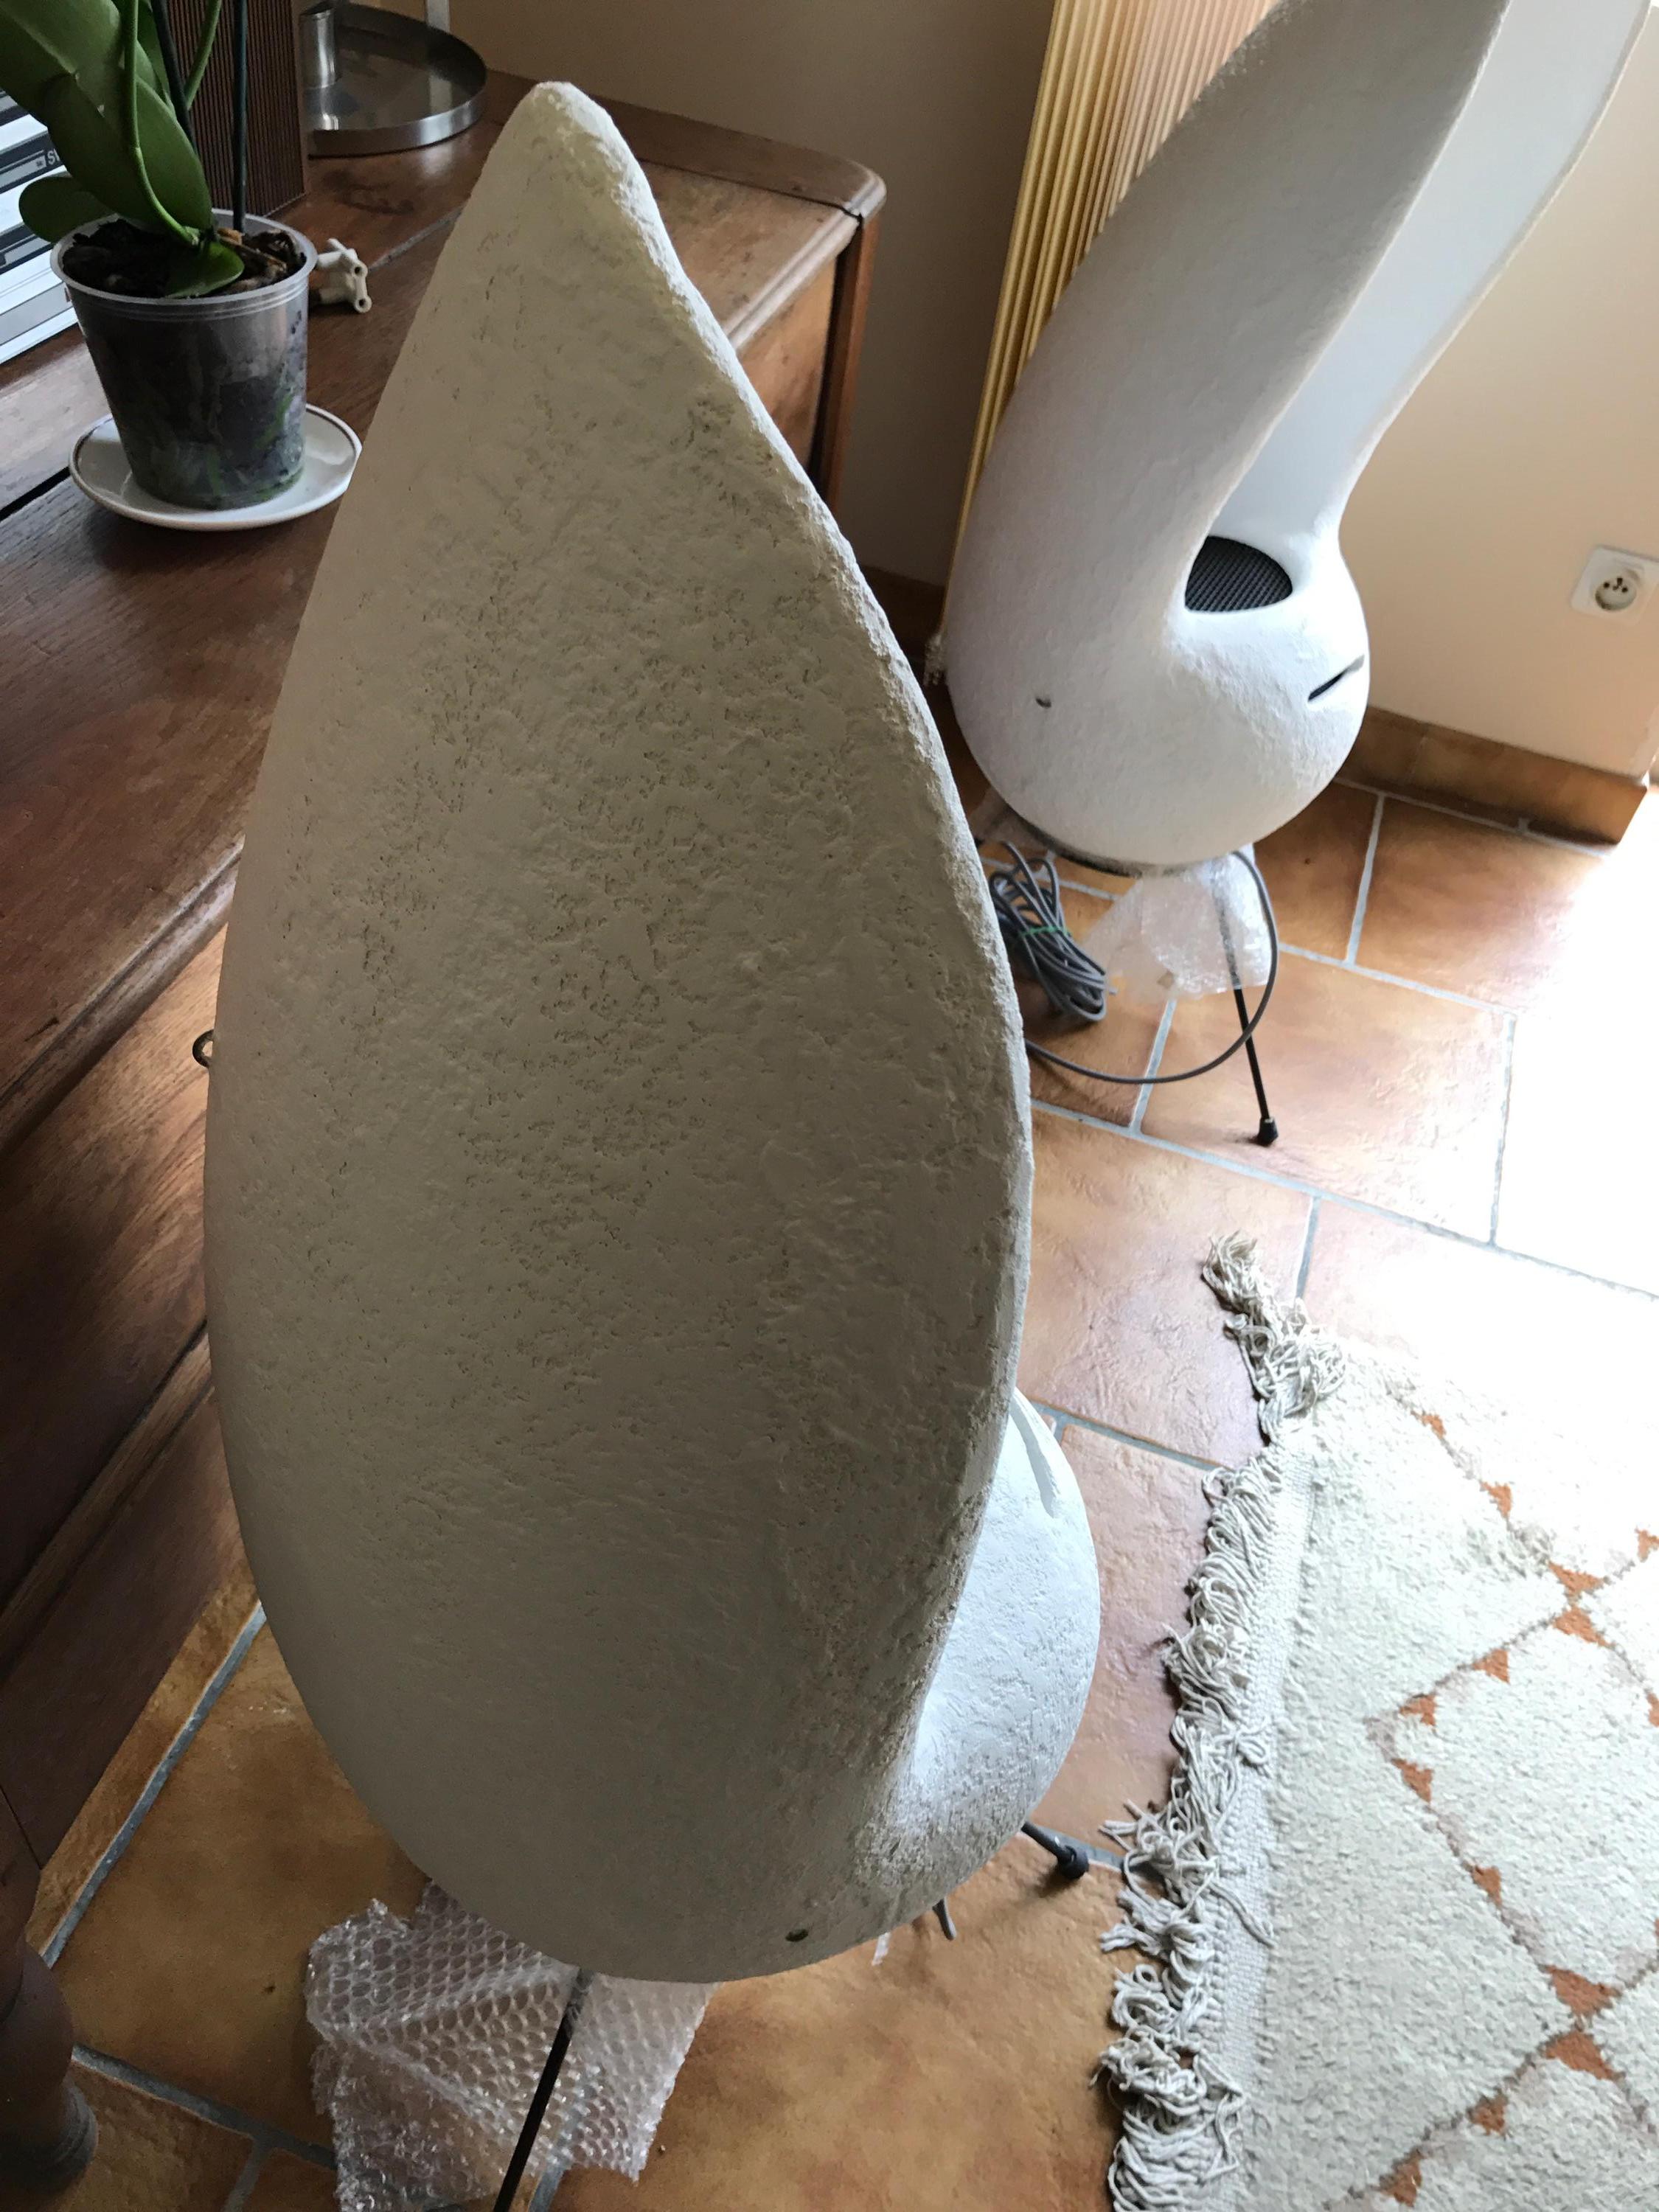 Very rare pair of conch speaker
Elipson 45s21
Say rabbit ears
Staff (plaster),
circa 1955-1960.
Hp supravox T215srtf bi-cone
Yield 97db / 1w / 1m
Measures: Height 90 cms
18 kg each
In a perfect state
Revised and restored
2900 euros the